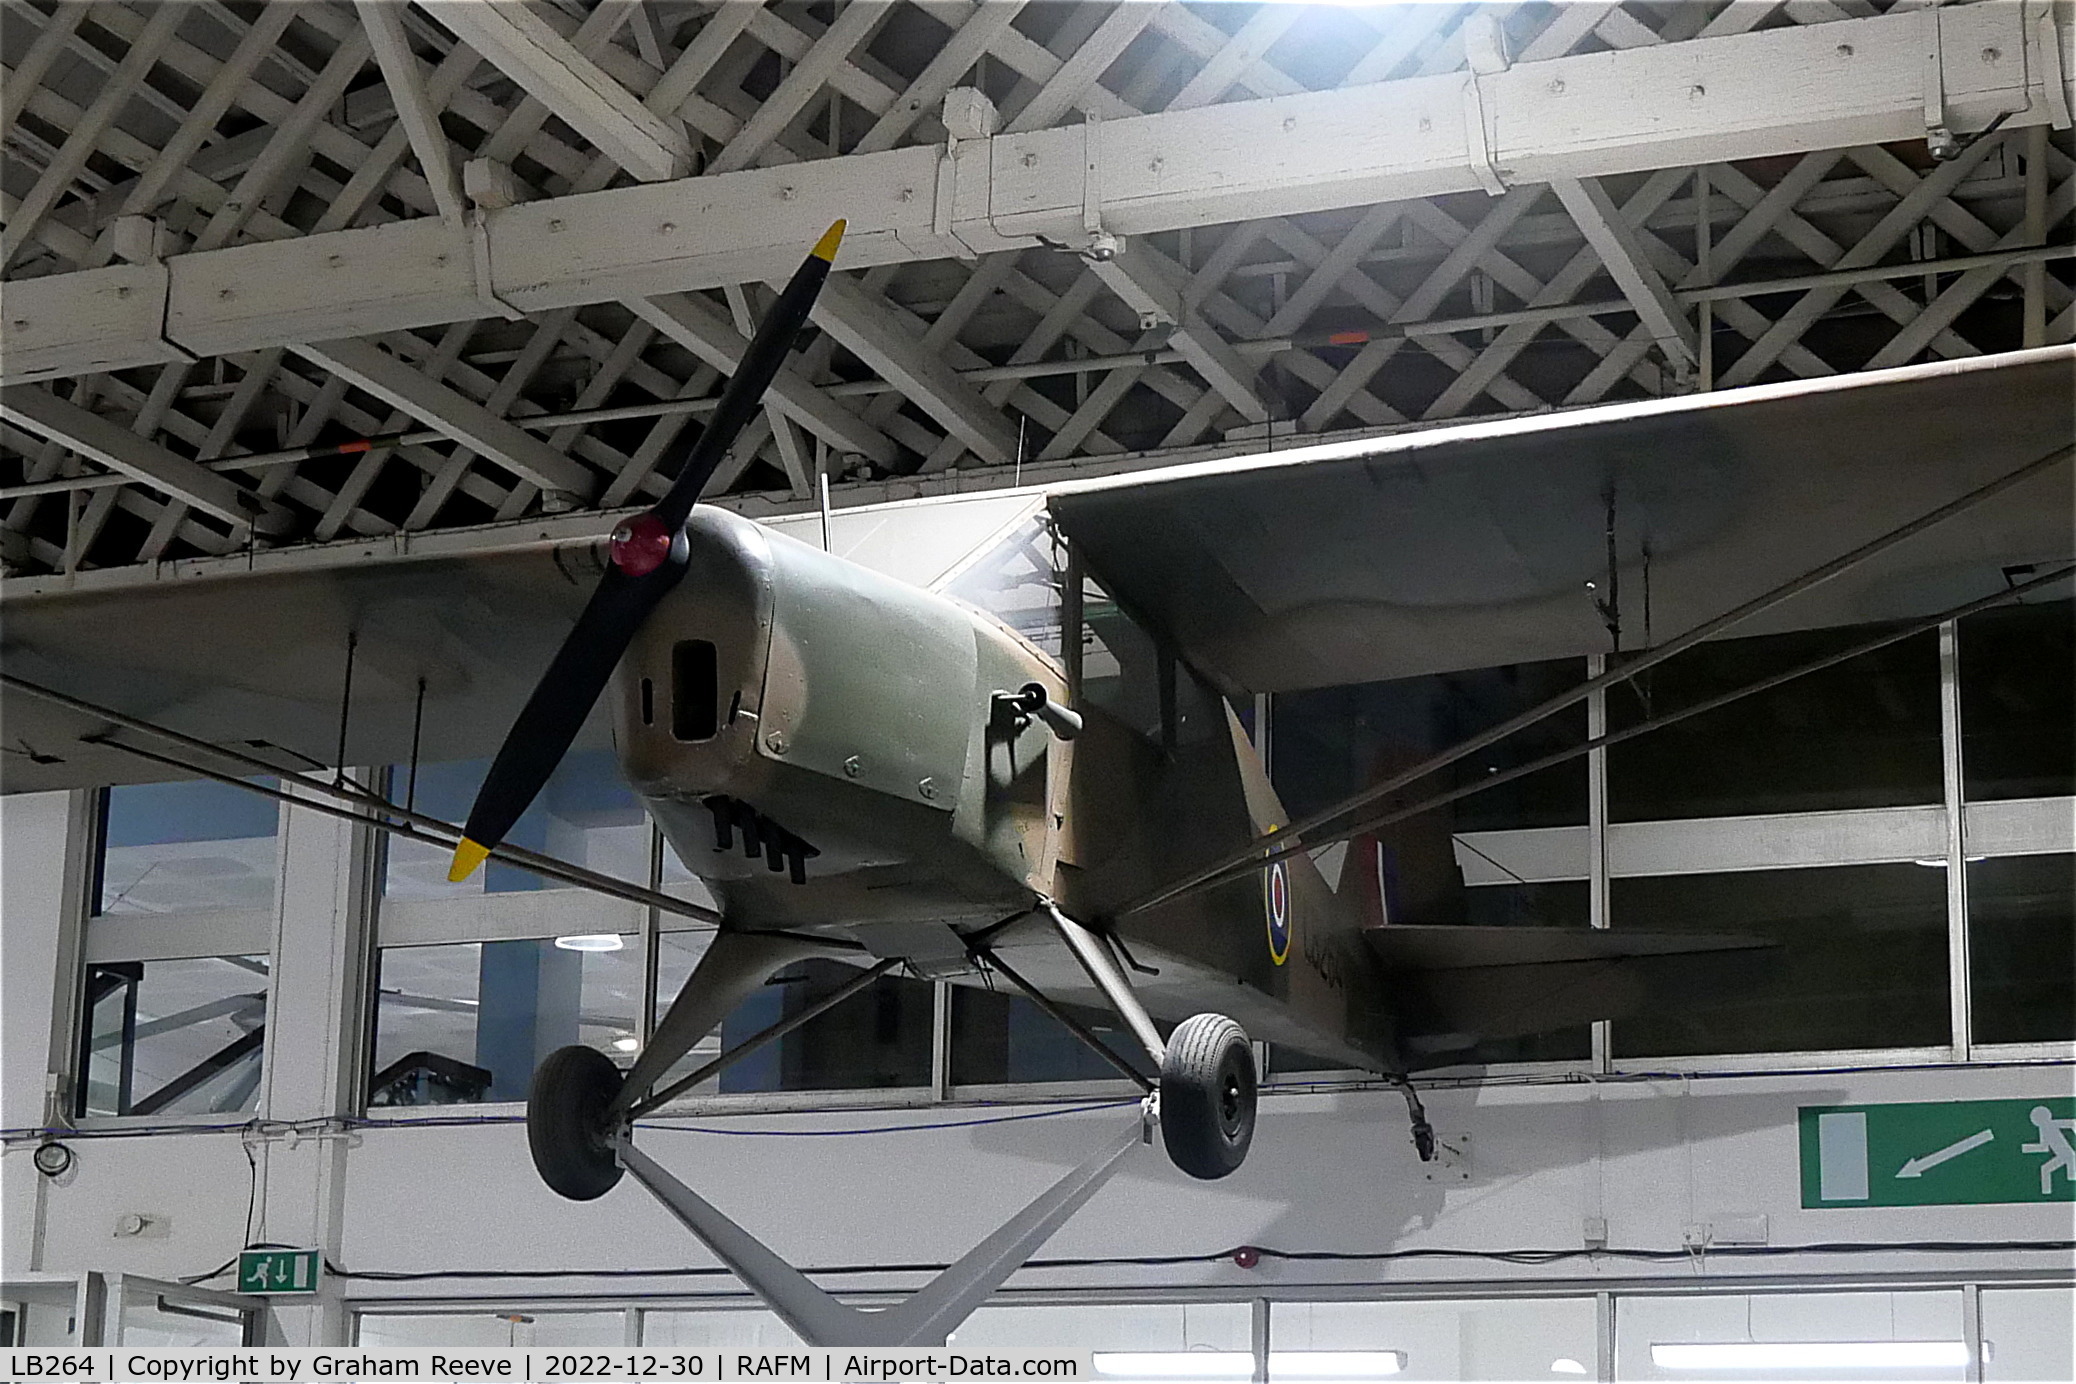 LB264, 1942 Taylorcraft Auster 1 C/N 134, On display at the RAF Museum, Hendon.